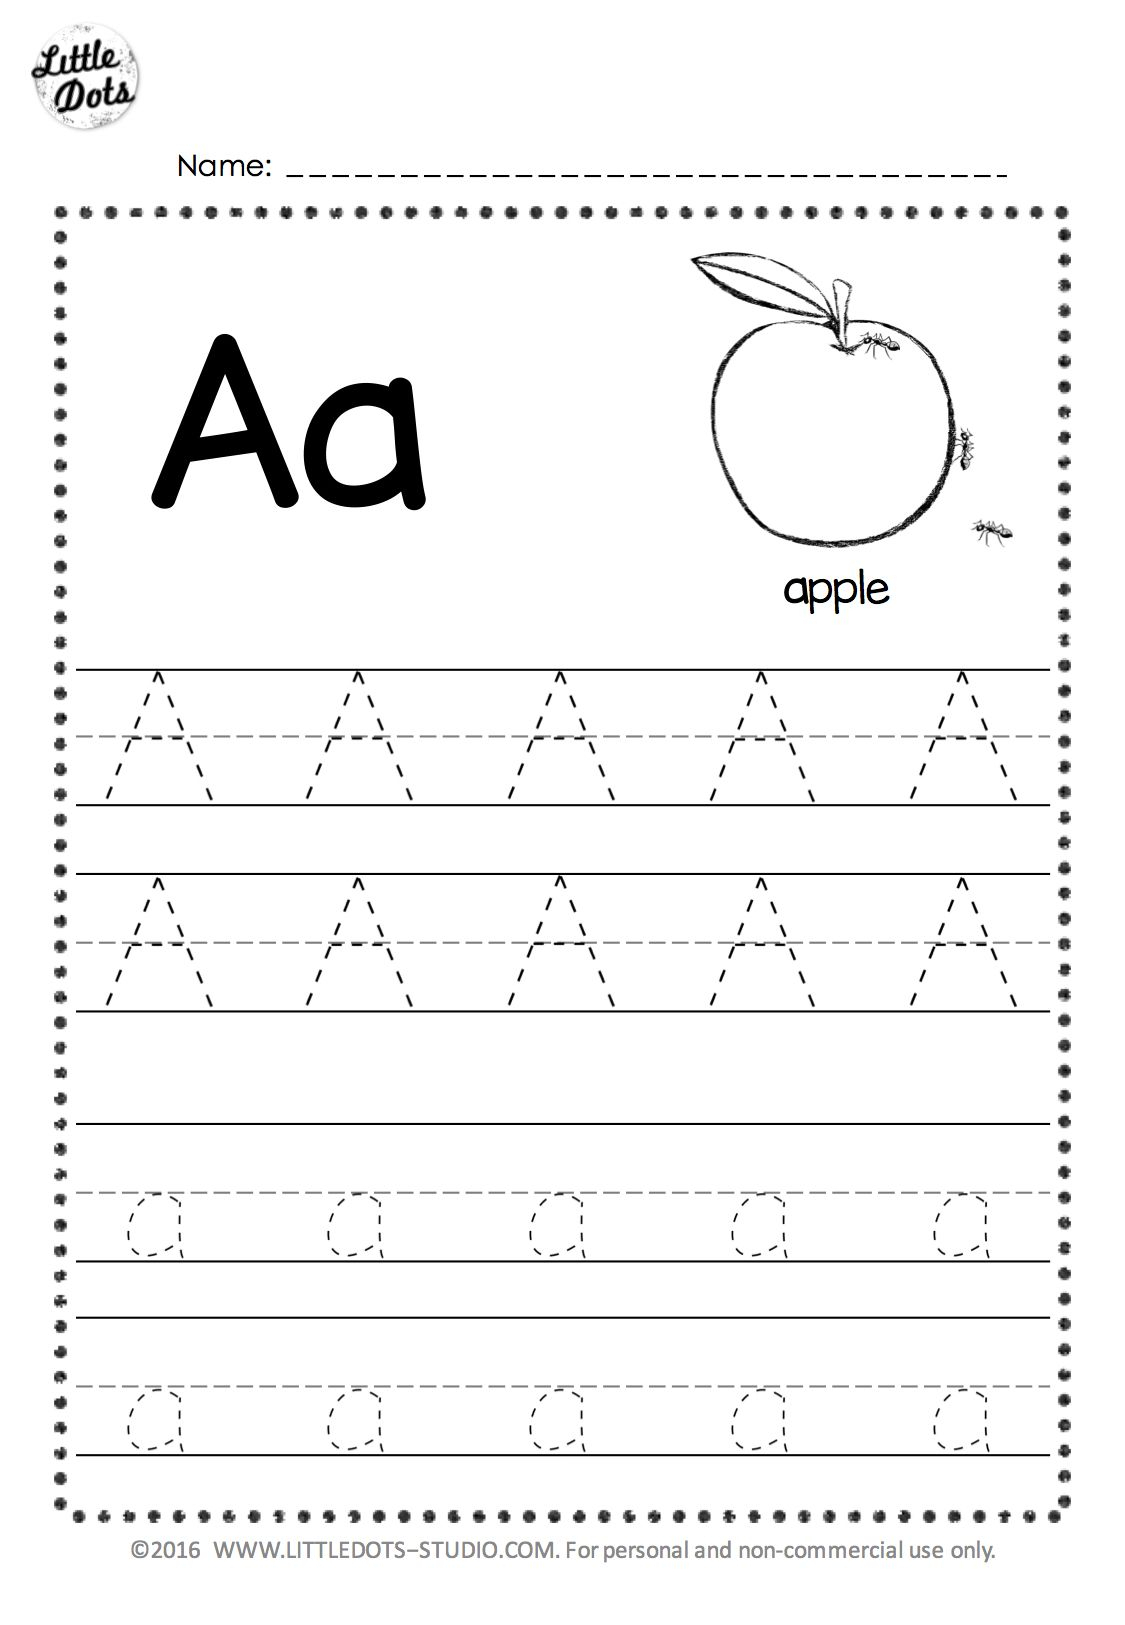 free abc worksheets for pre k activity shelter free abc worksheets